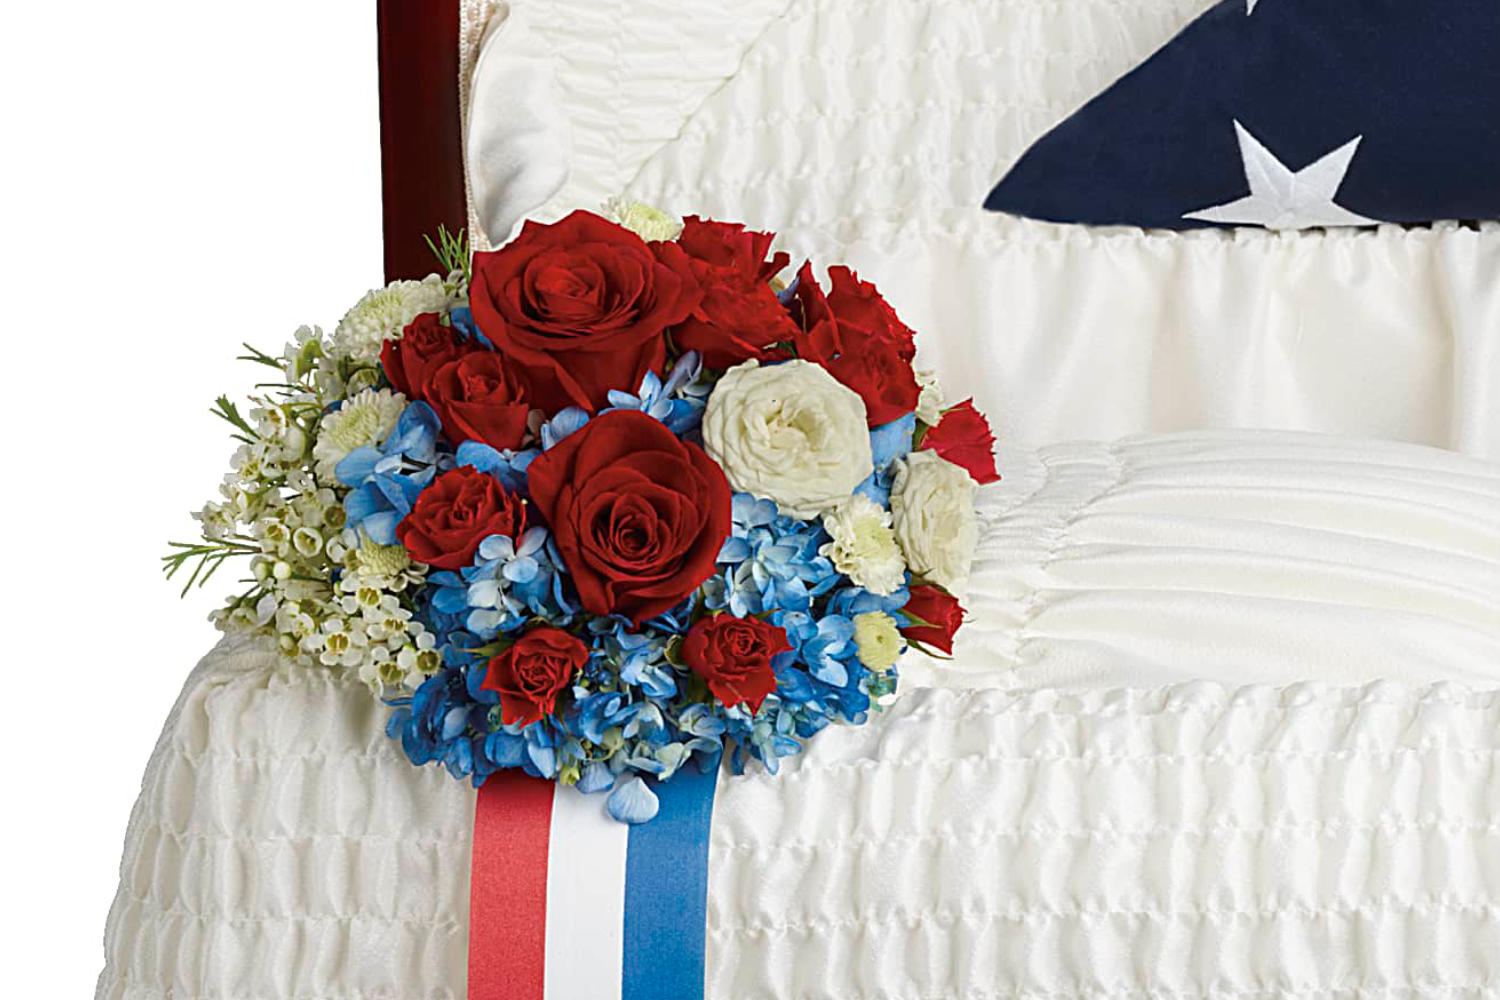 A casket insert made of Blue hydrangea, red roses, red spray roses, white spray roses, white button spray chrysanthemums, and white waxflower are accented with galax leaf. This beatufil funeral flower arrangement is over the corner of the opened casket